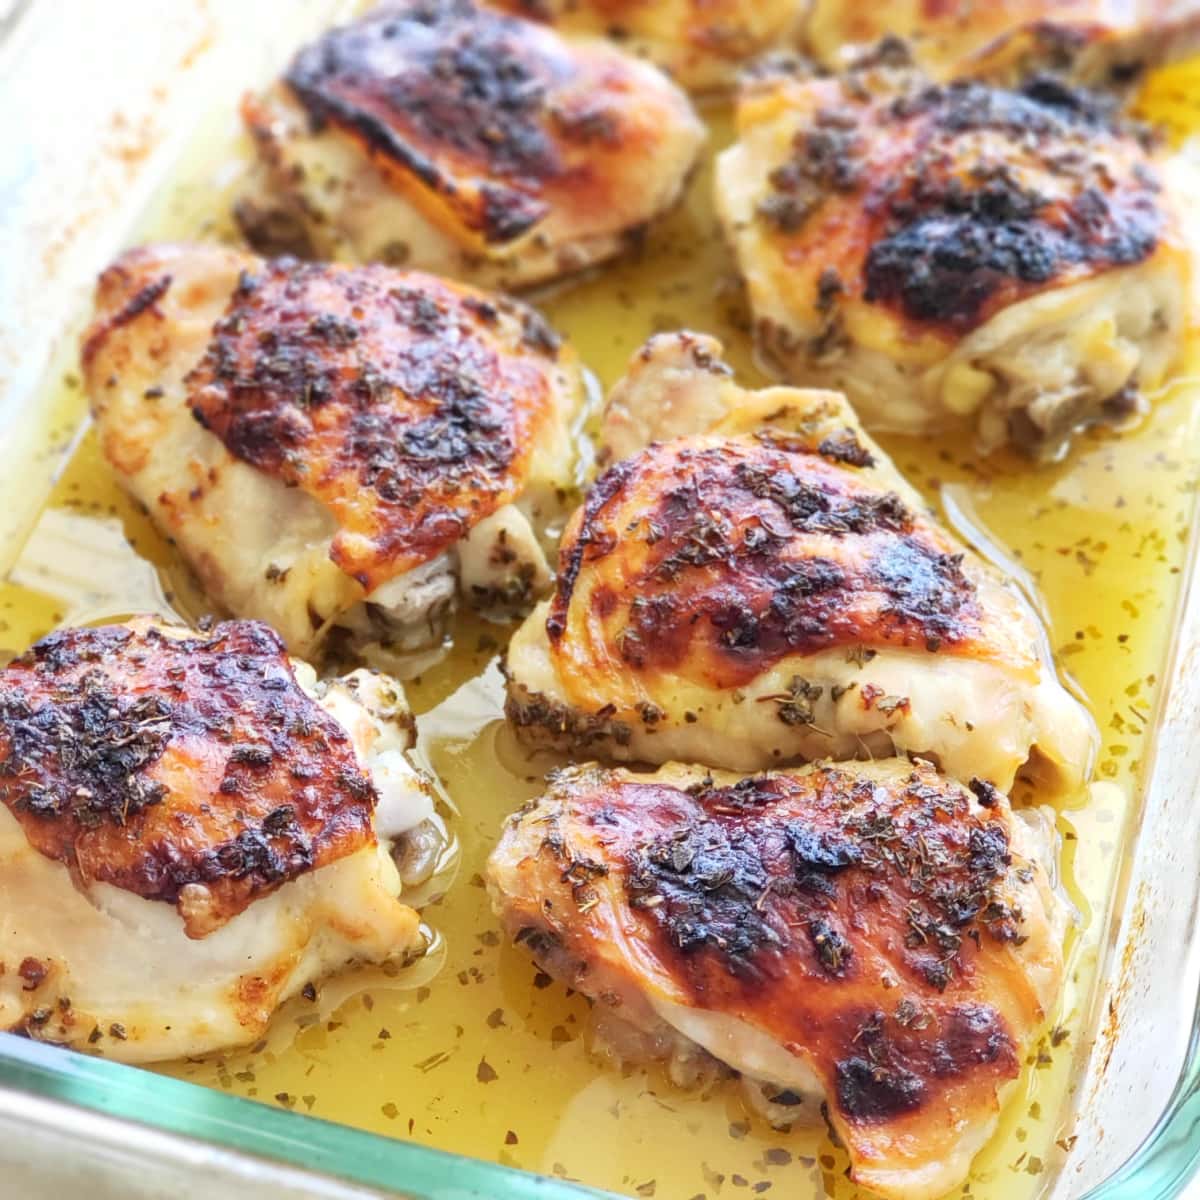 6 roasted chicken thighs in yellow sauce in a glass baking dish